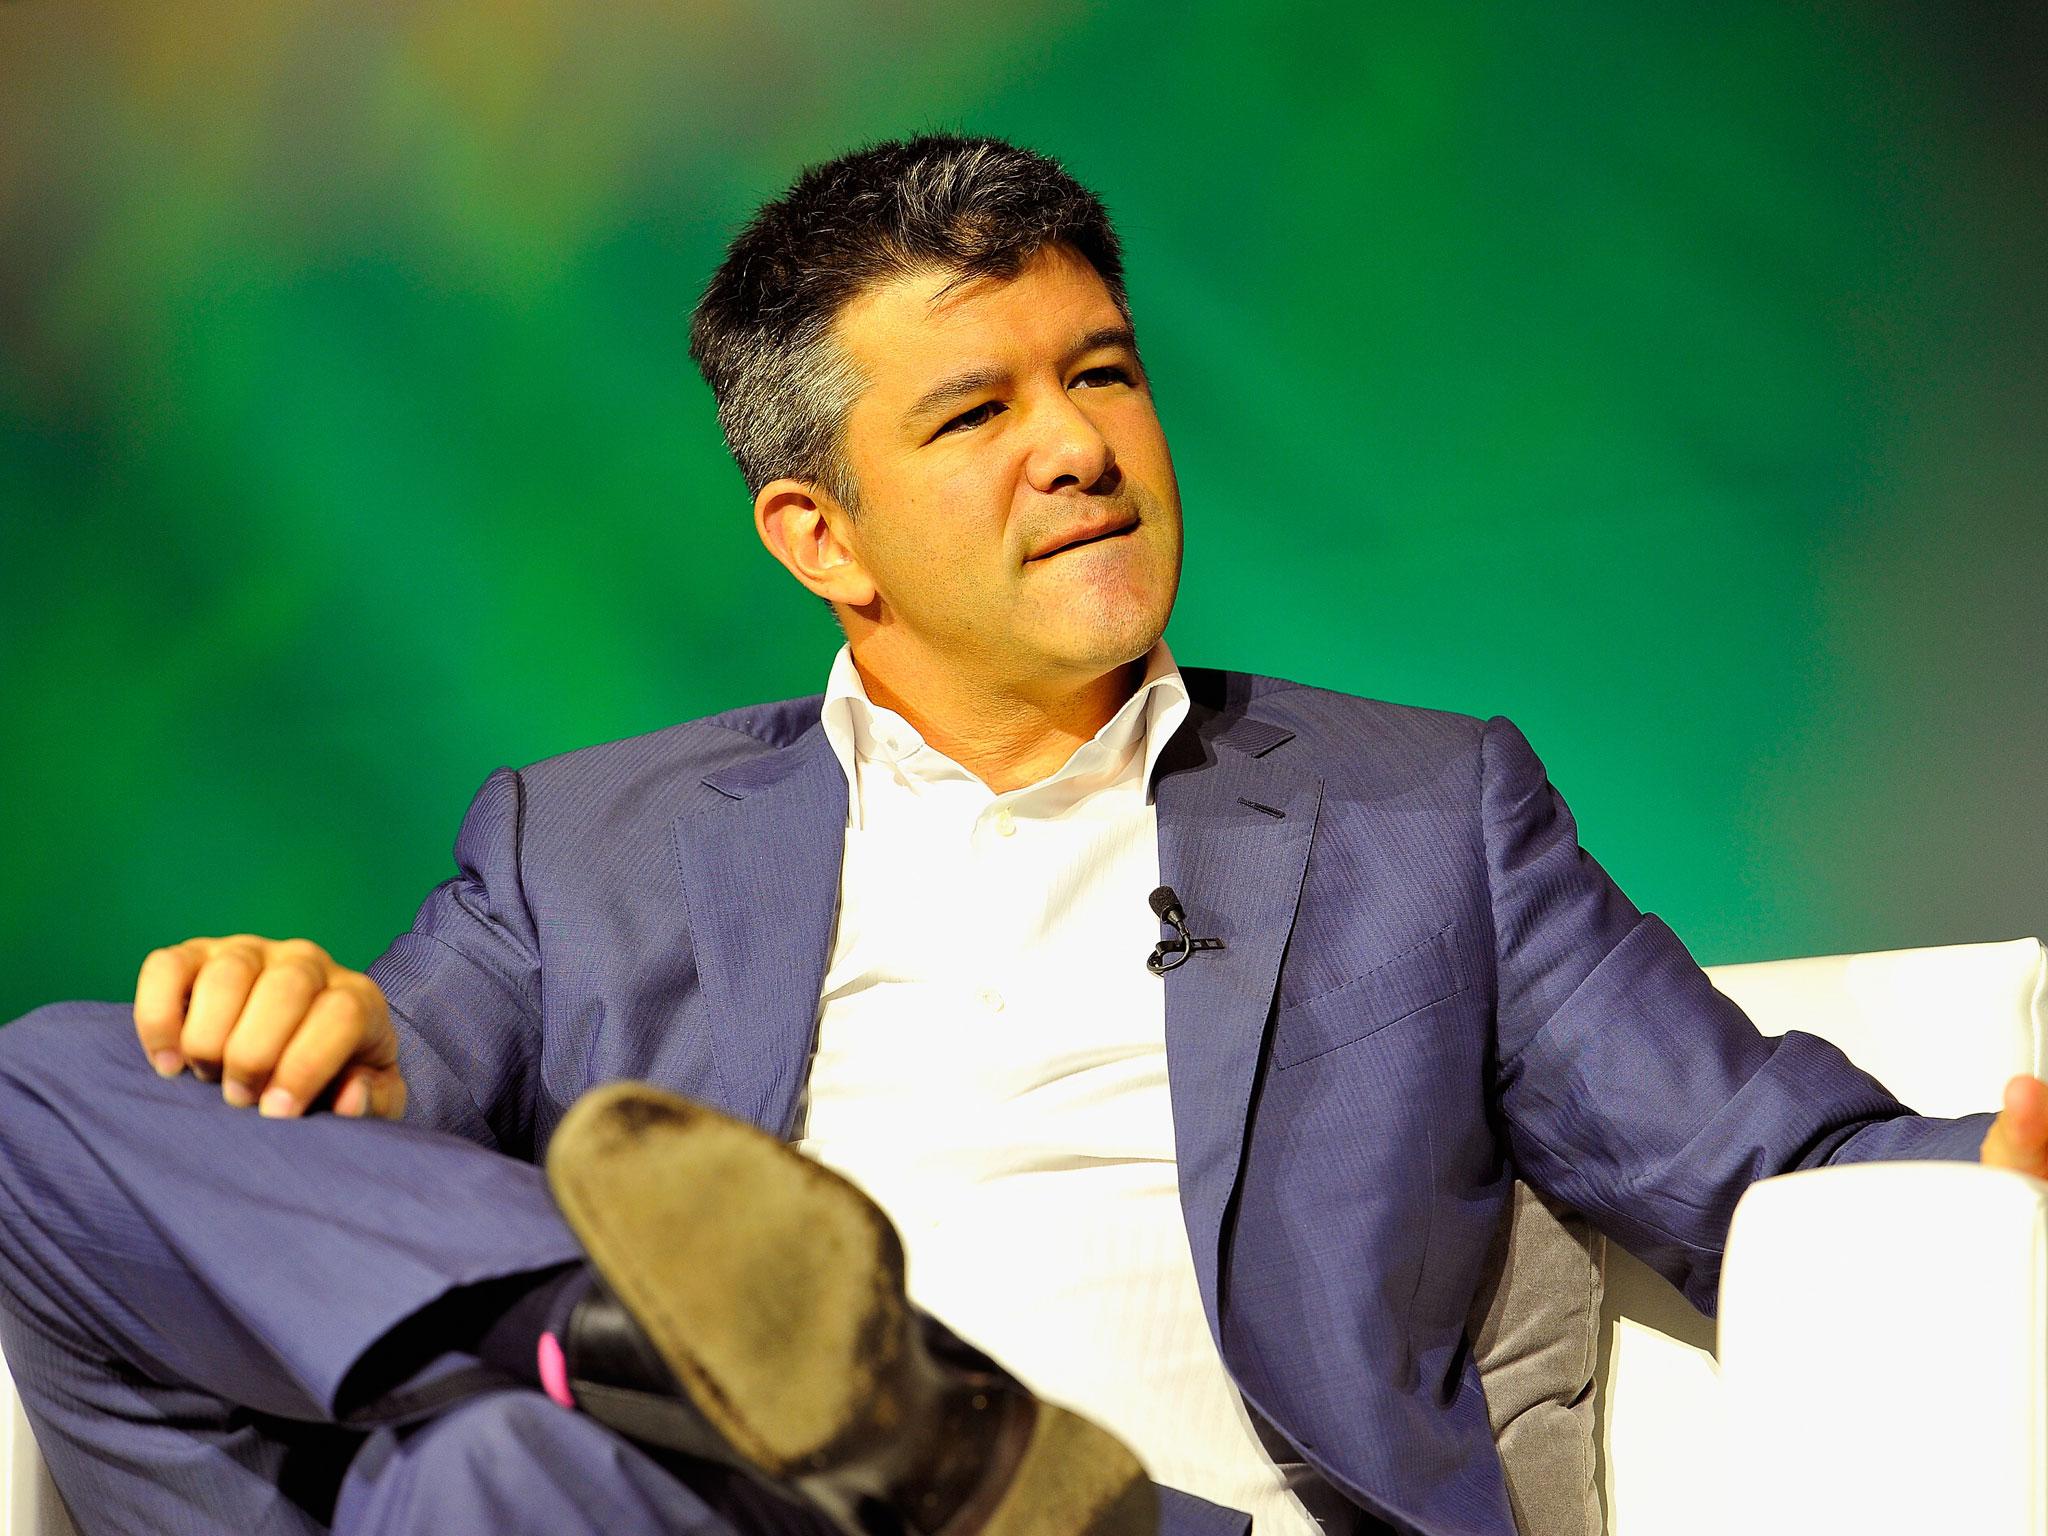 Uber's Travis Kalanick has sealed an alliance with China's Didi Chuxing